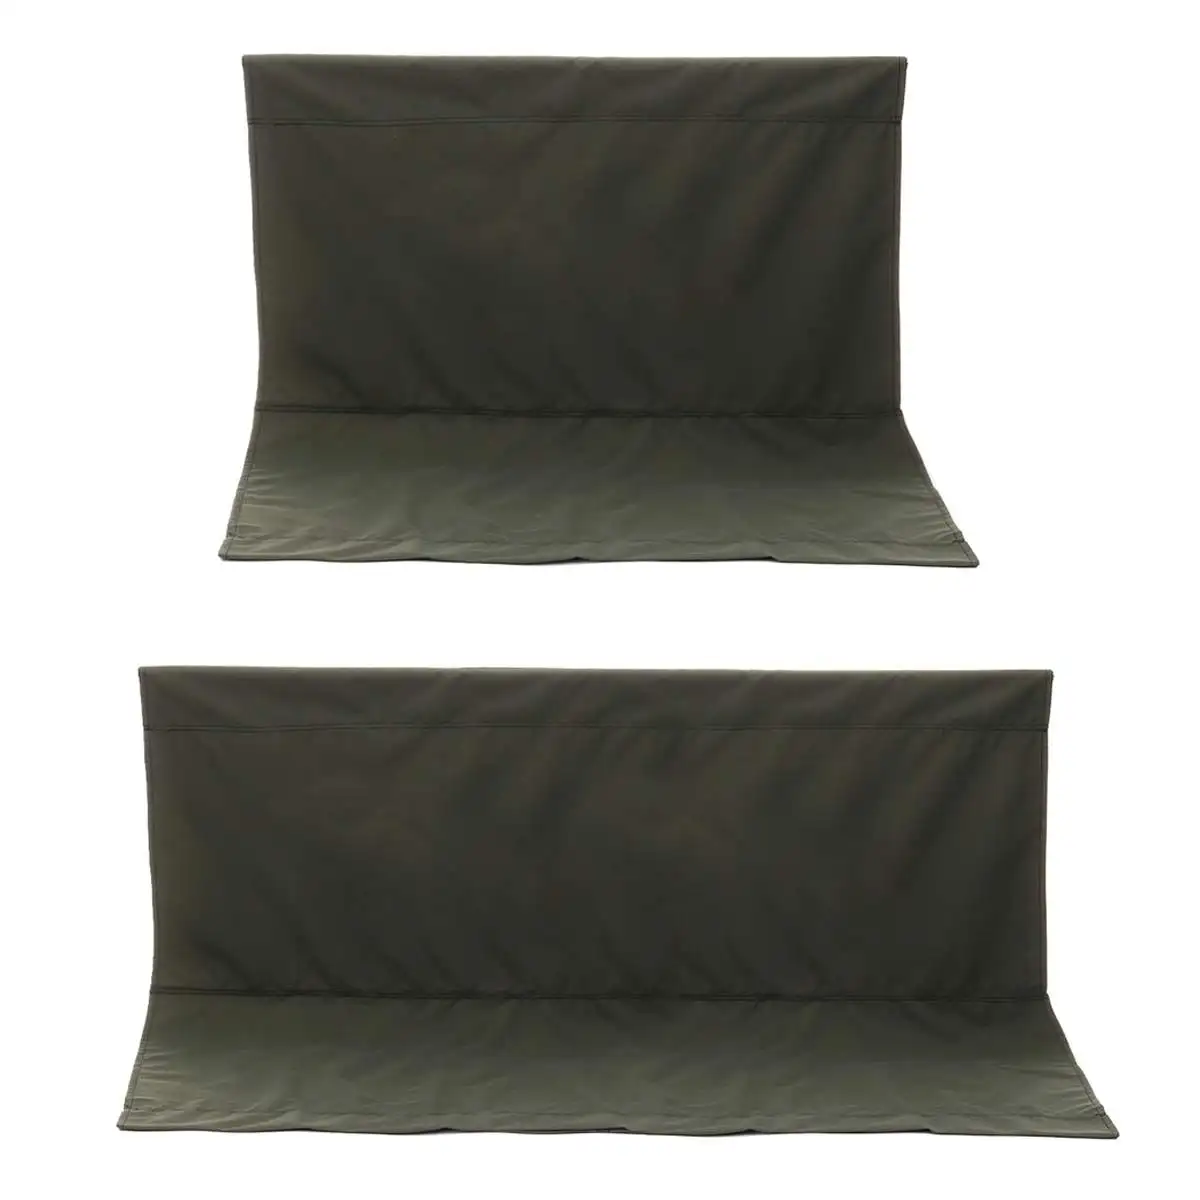 2/3 Seater Outdoor Waterproof Swing Cover Chair Bench Replacement Patio Garden Swing Case Chair Cushion Backrest Dust Cover